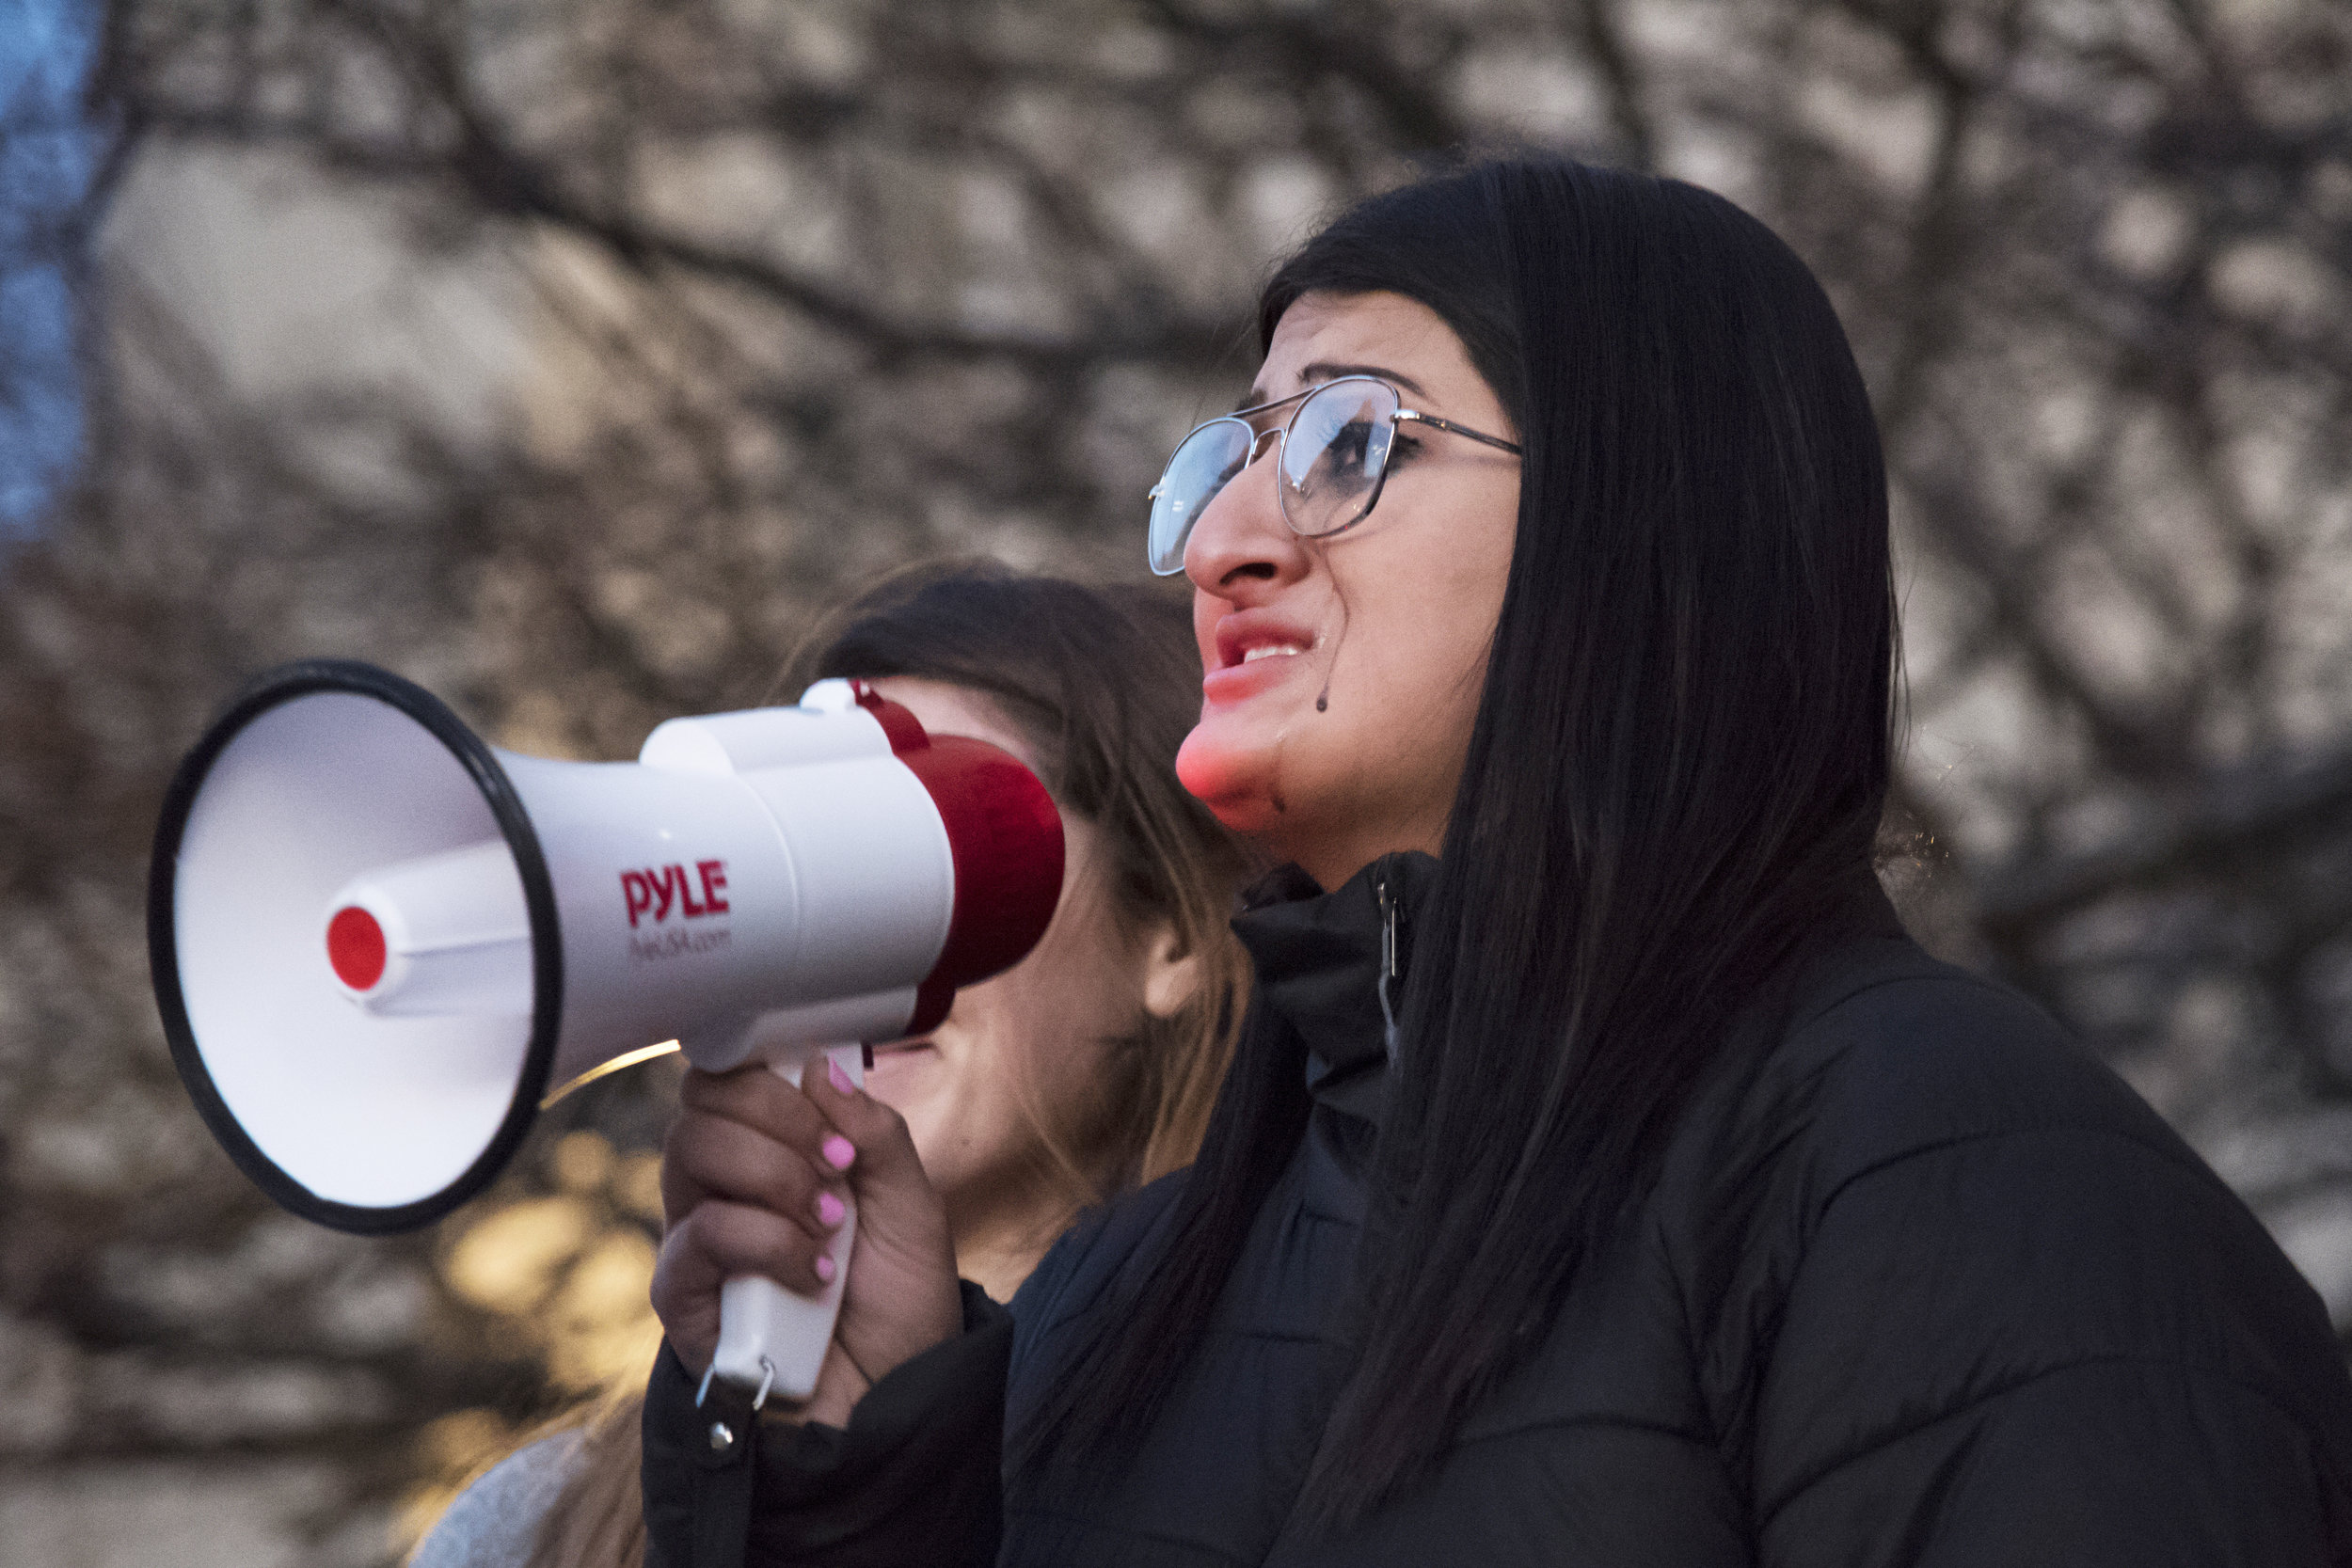  Maya Anand, who had a close friend involved in the parkland shooting, speaks at the BU Rally Against Gun Violence held in Marsh Plaza February 26. Speaking without a prepared speech, Anand shared her deeply personal experiences with gun violence to 